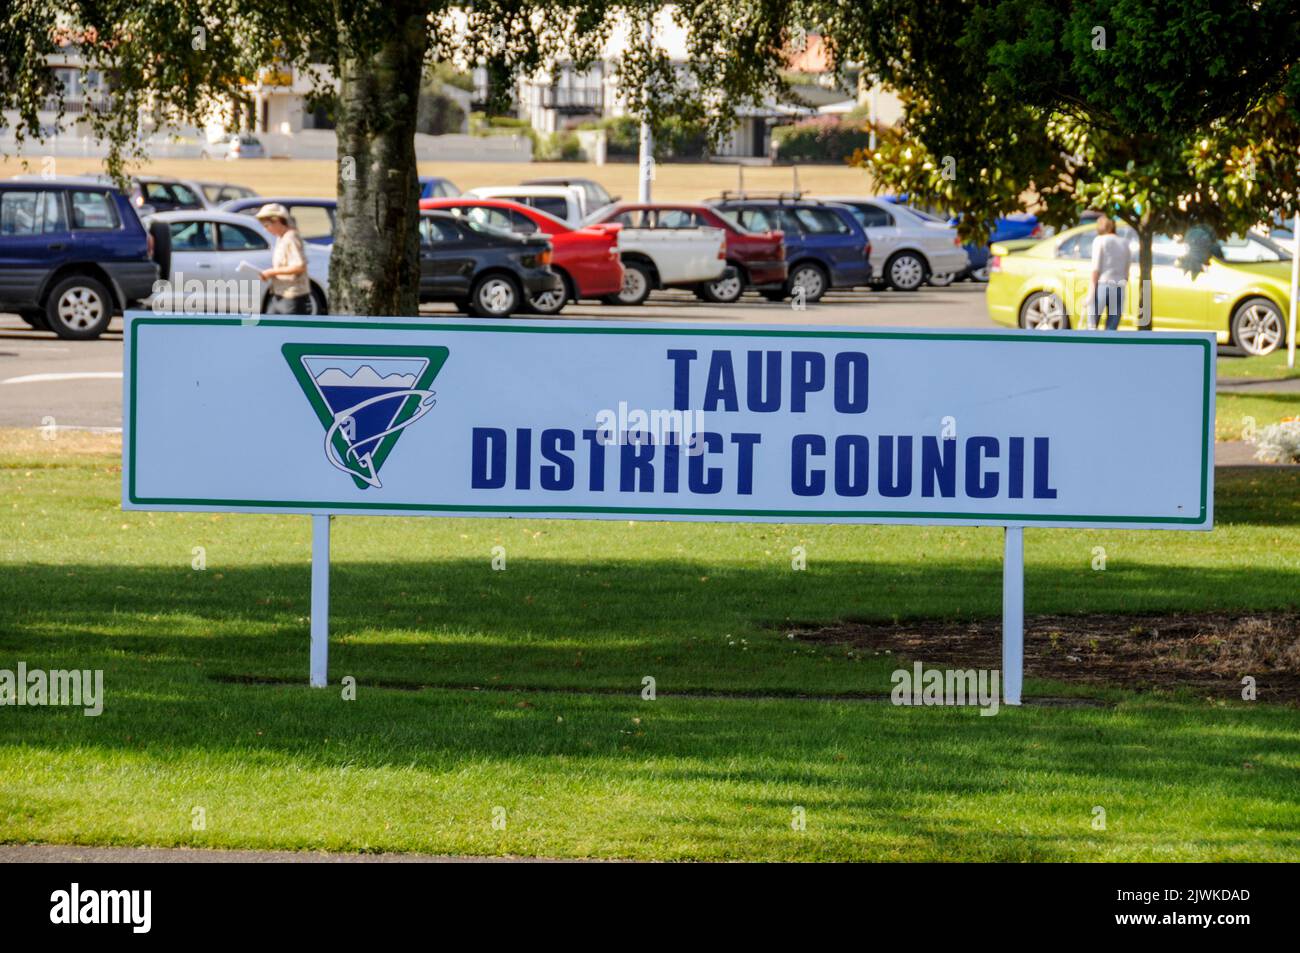 Taupo District Council at Taupo at Taupo, a town on Lake Taupo, a volcanic caldera near the centre of New Zealand's North Island. Stock Photo